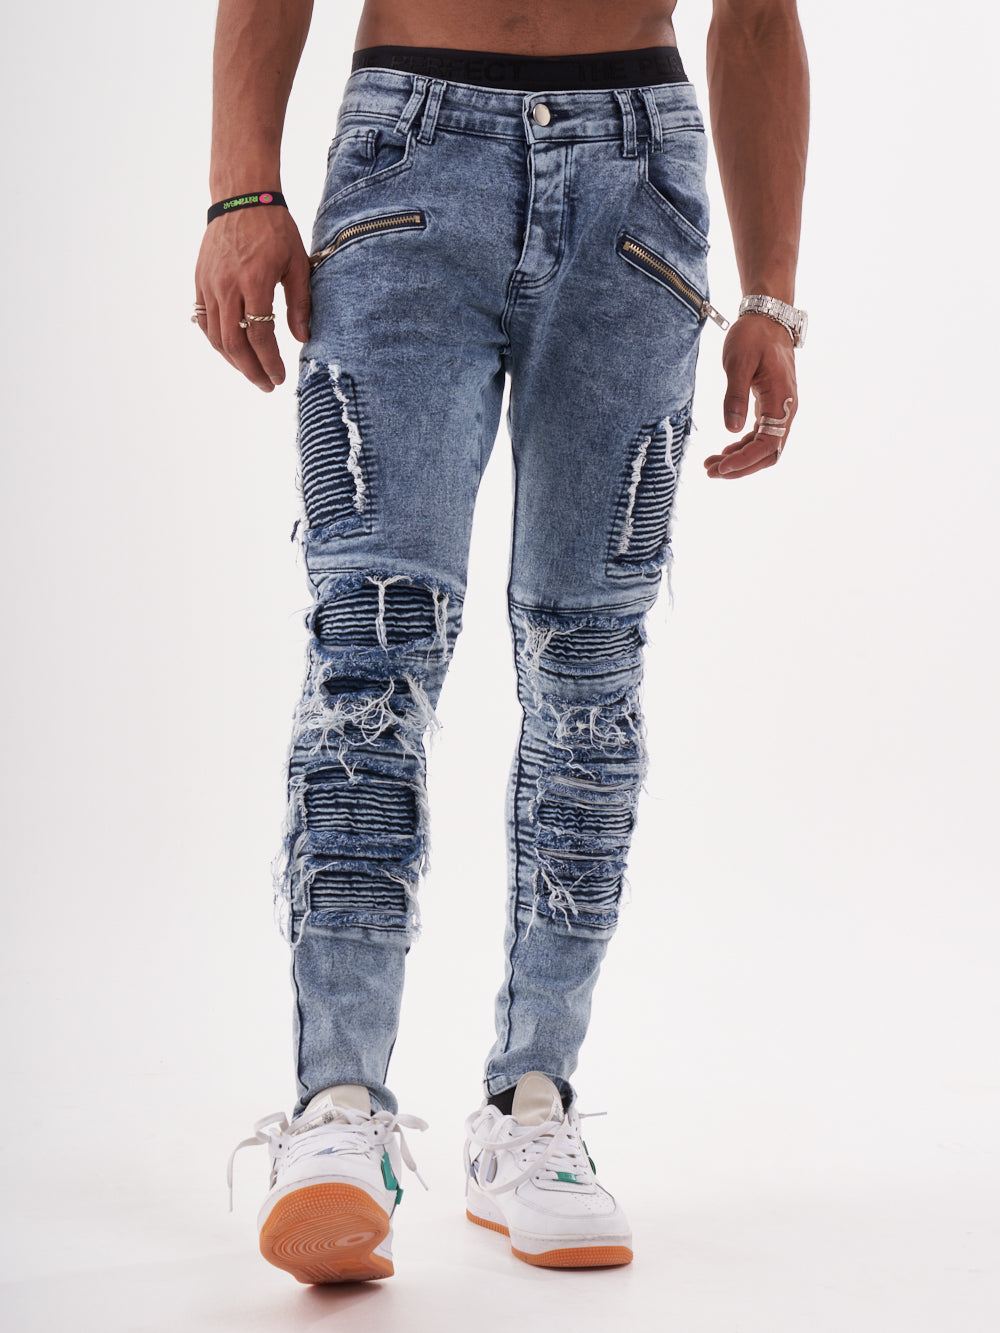 A man wearing ripped jeans and sneakers standing in front of a white background with RADICAL.